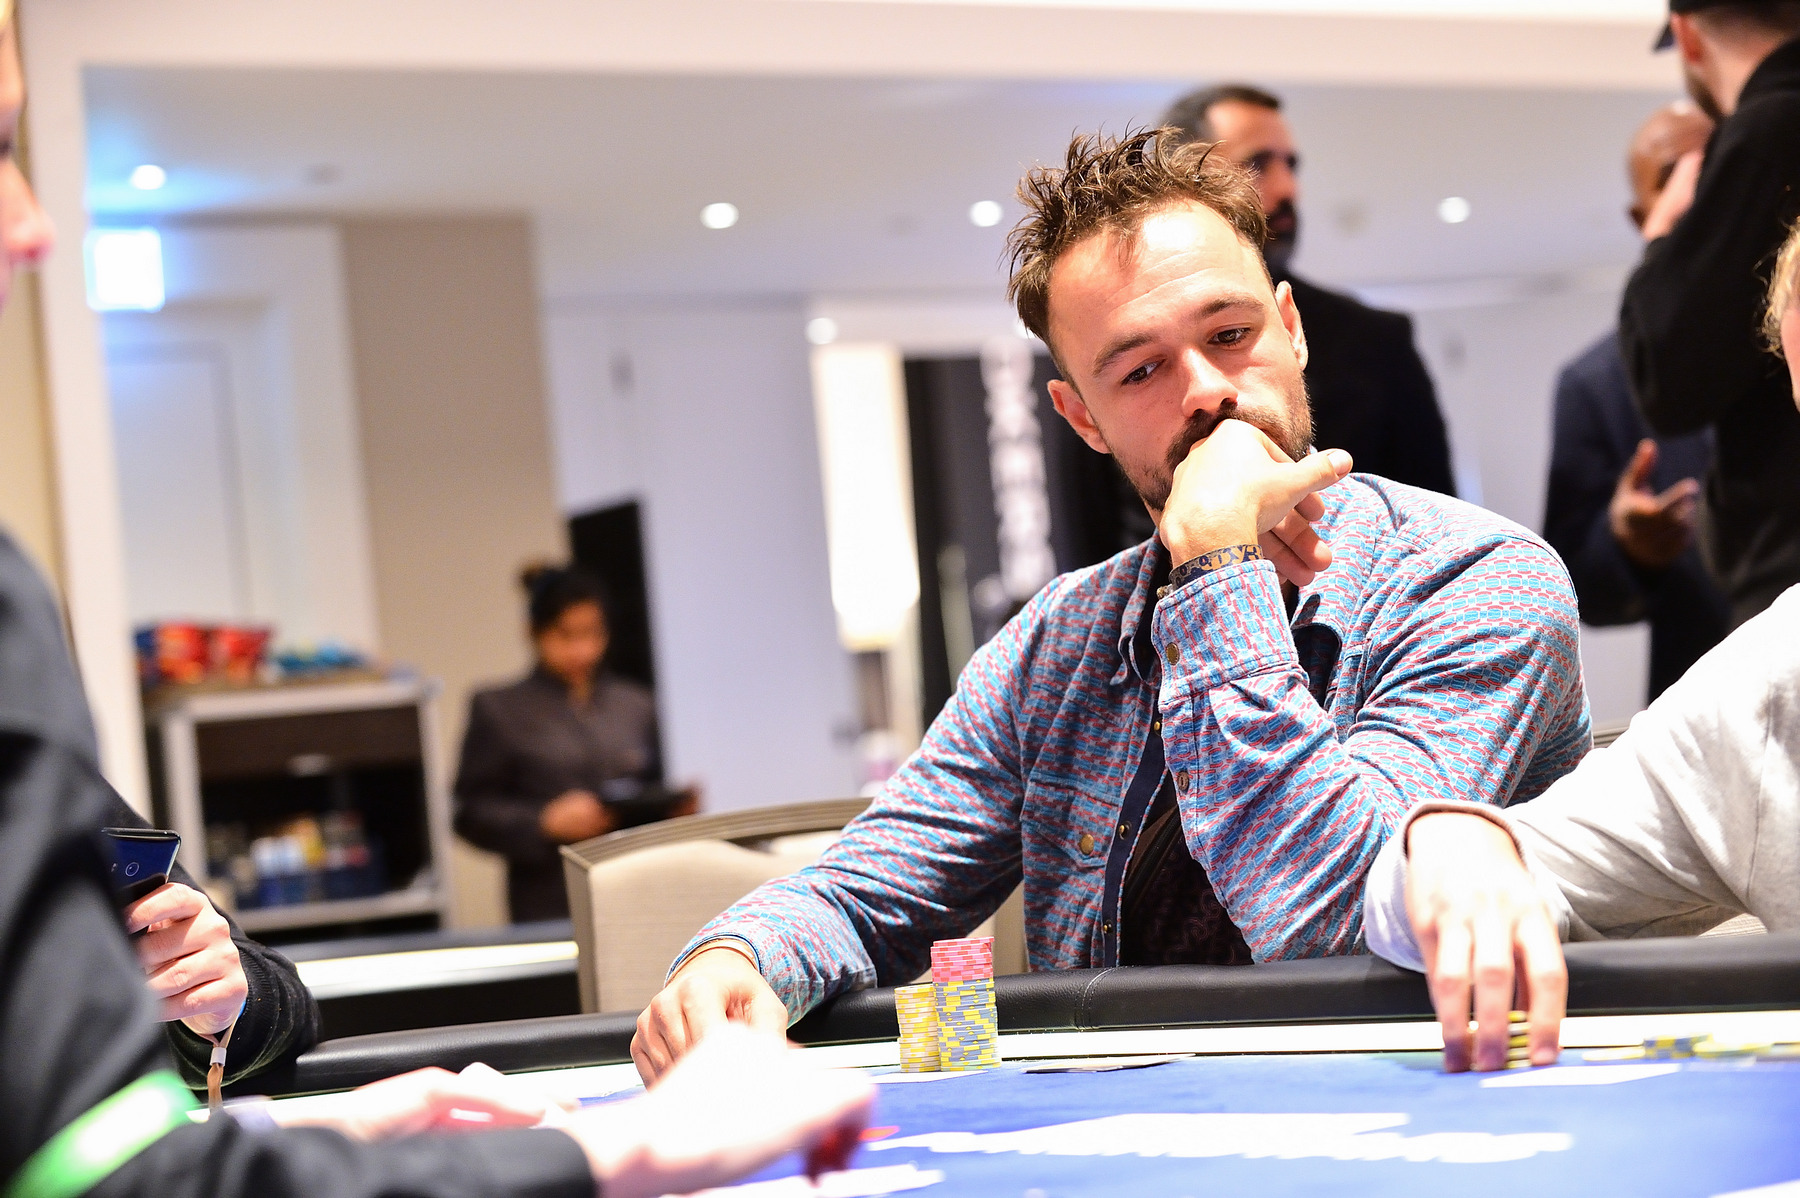 Ole Schemion playing at EPT London 2022